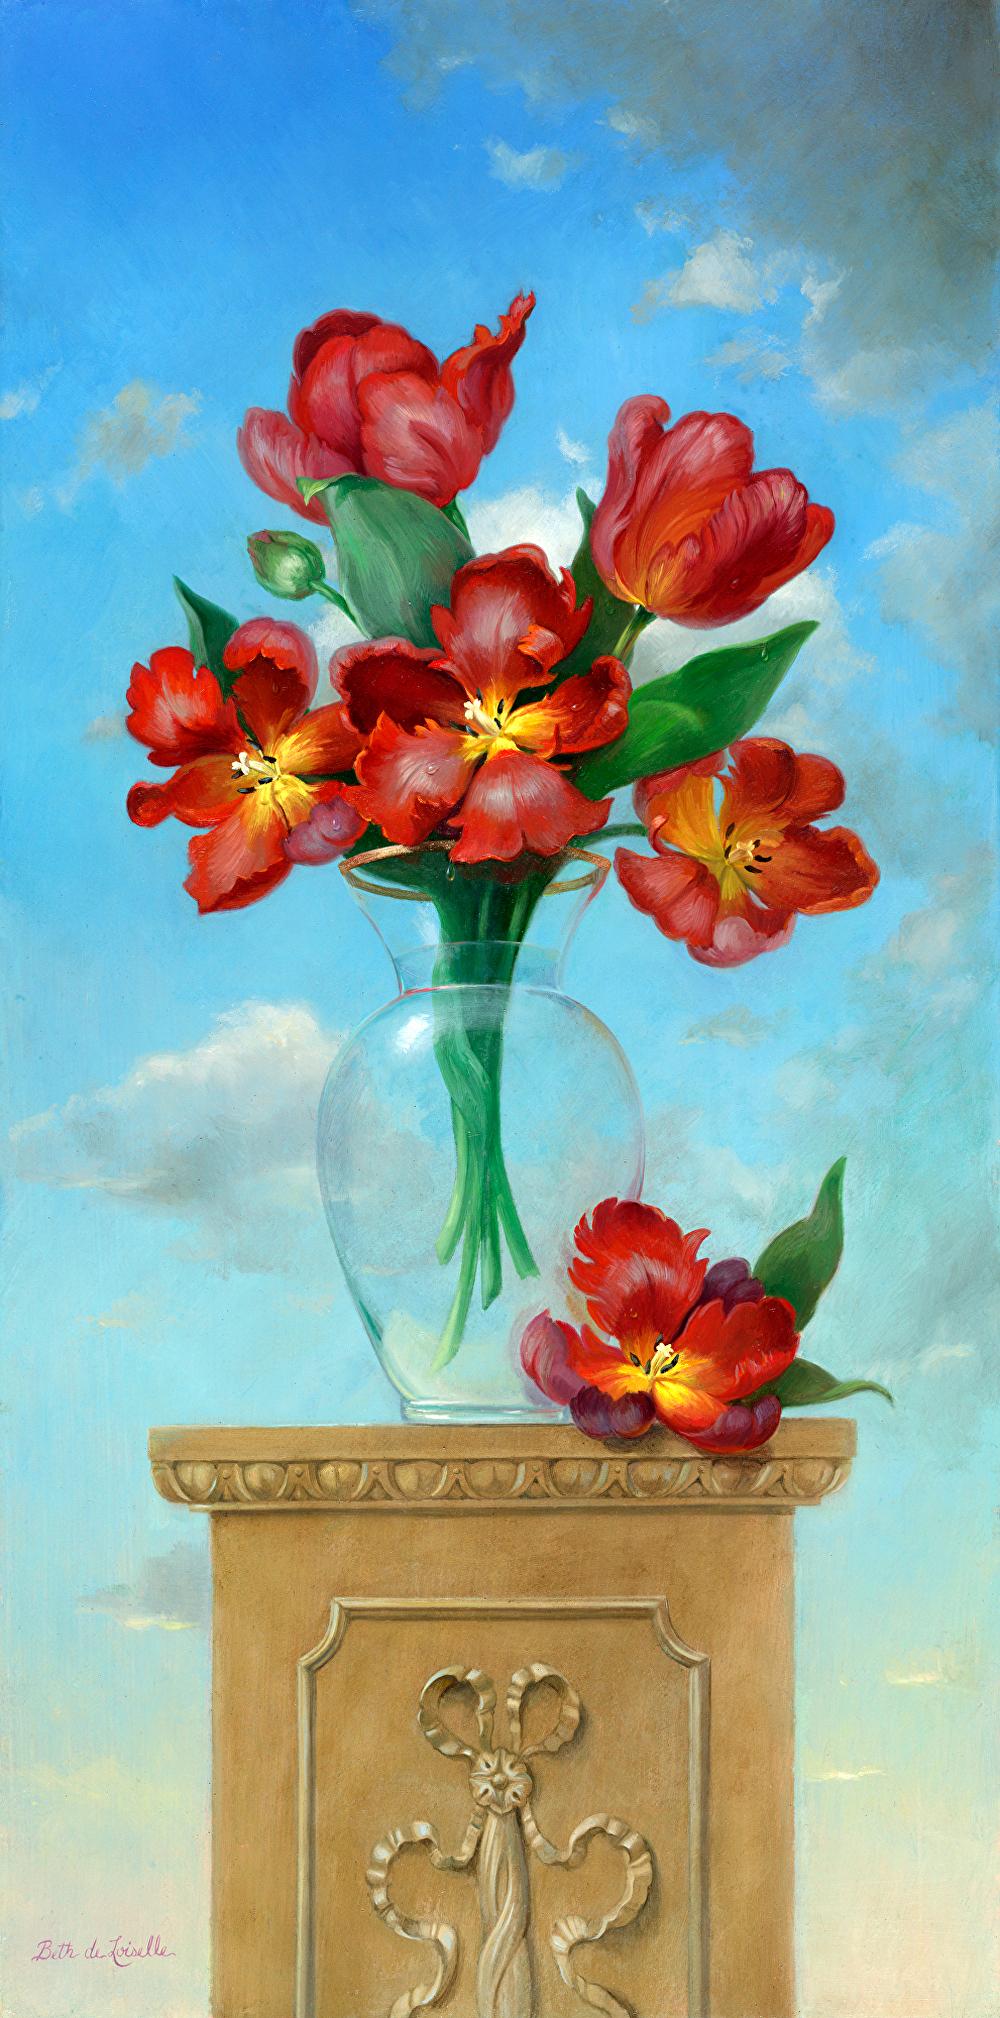 Vibrant Red Parrot Tulips Reach Up to The Sky in Dramatic Vertical Still-Life